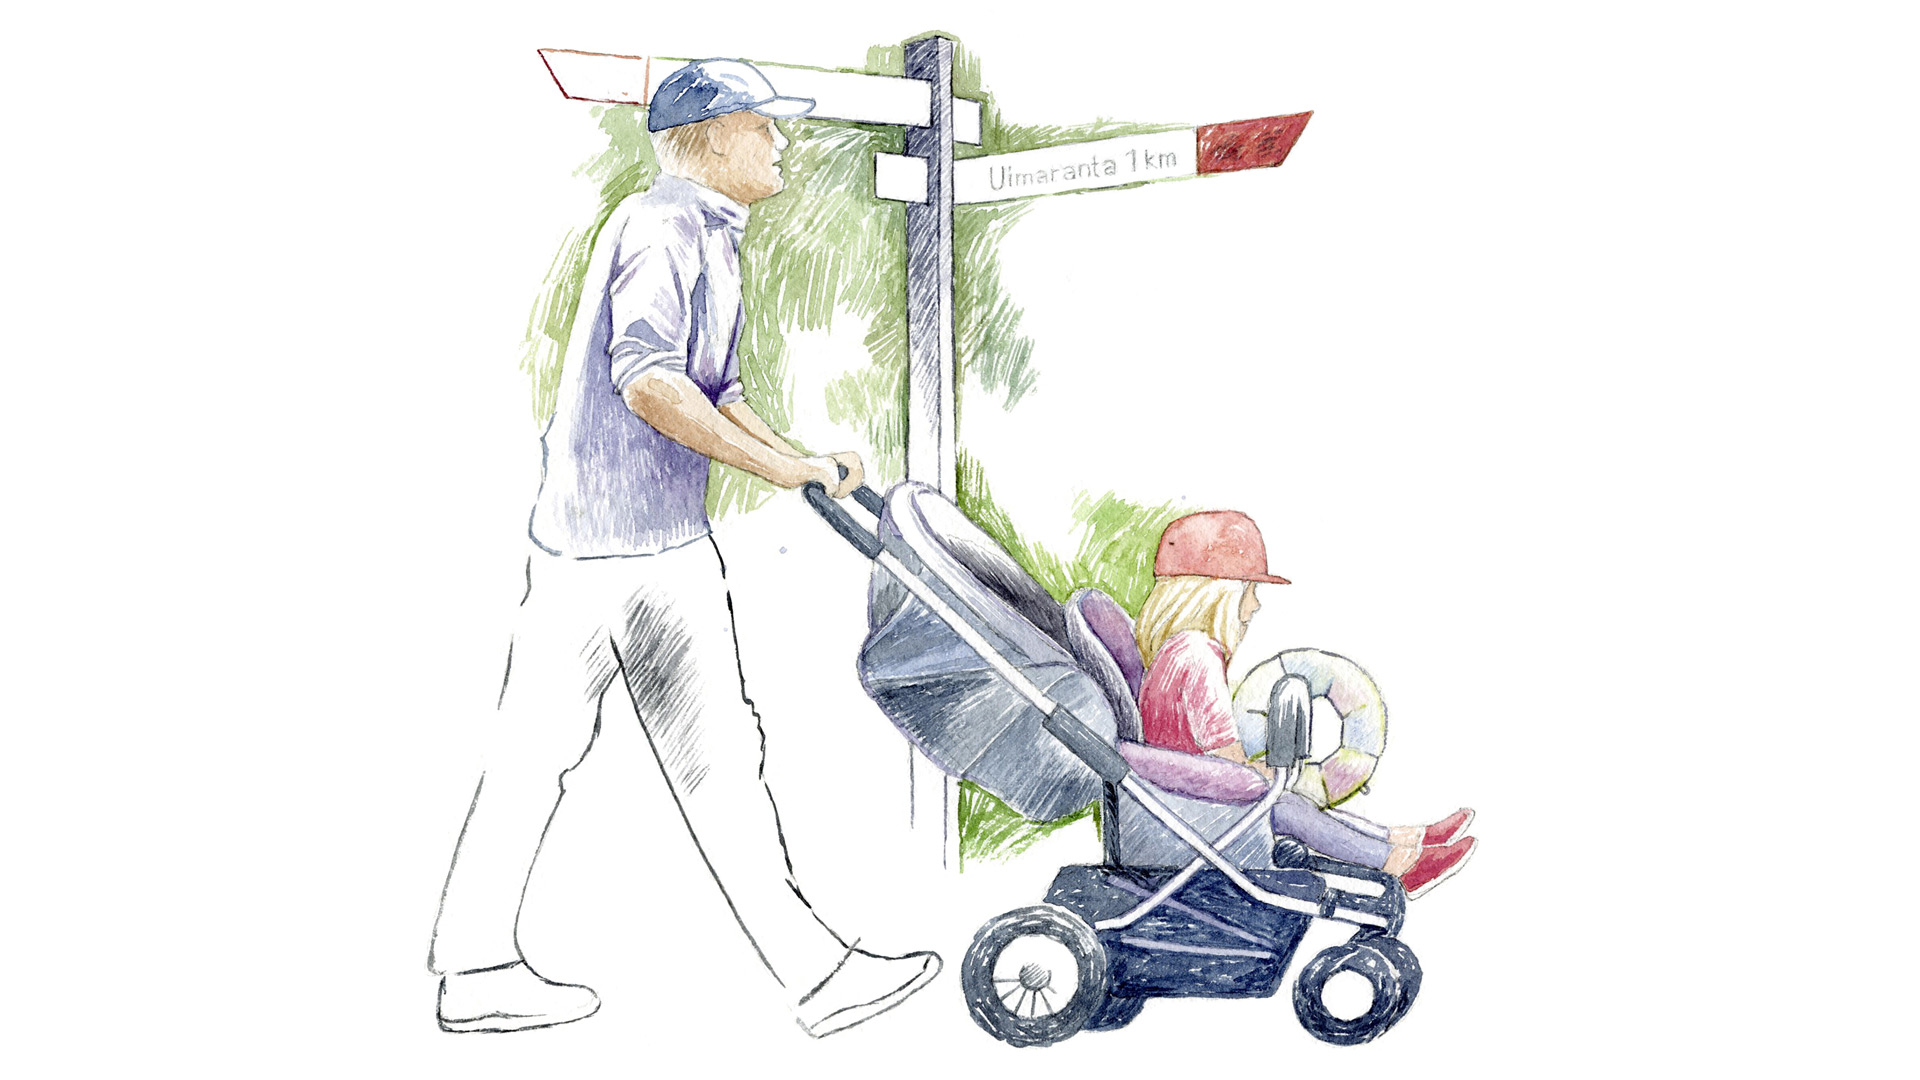 Watercolor by Juha Ilkka: a man pushes a pram with a small child in it. Directional signs can be seen in the background.